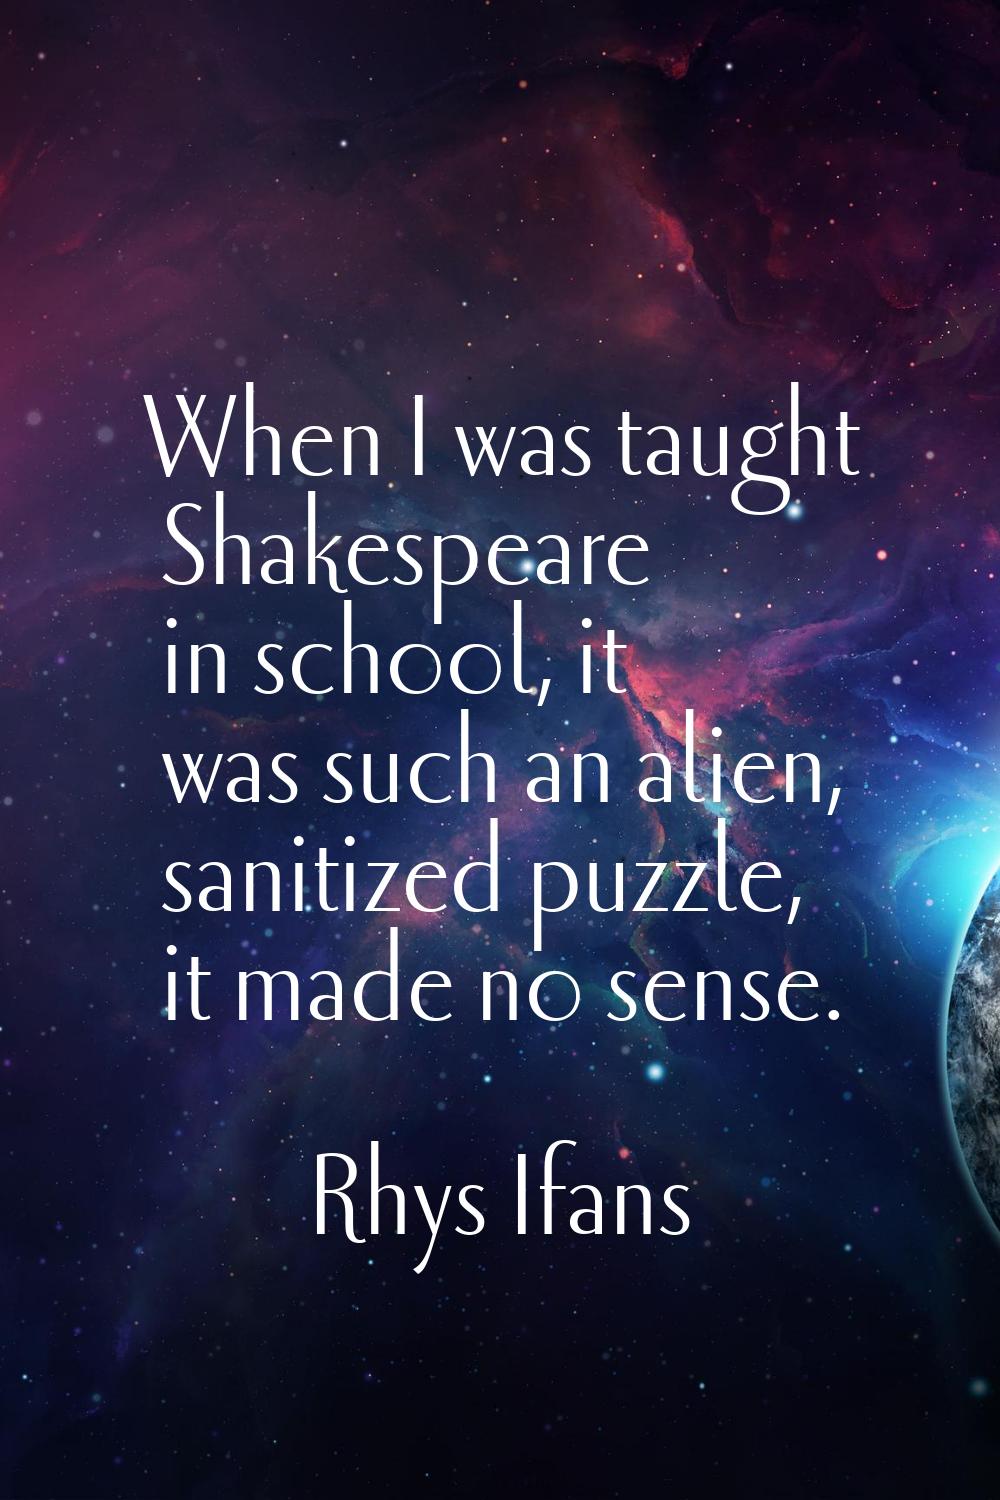 When I was taught Shakespeare in school, it was such an alien, sanitized puzzle, it made no sense.